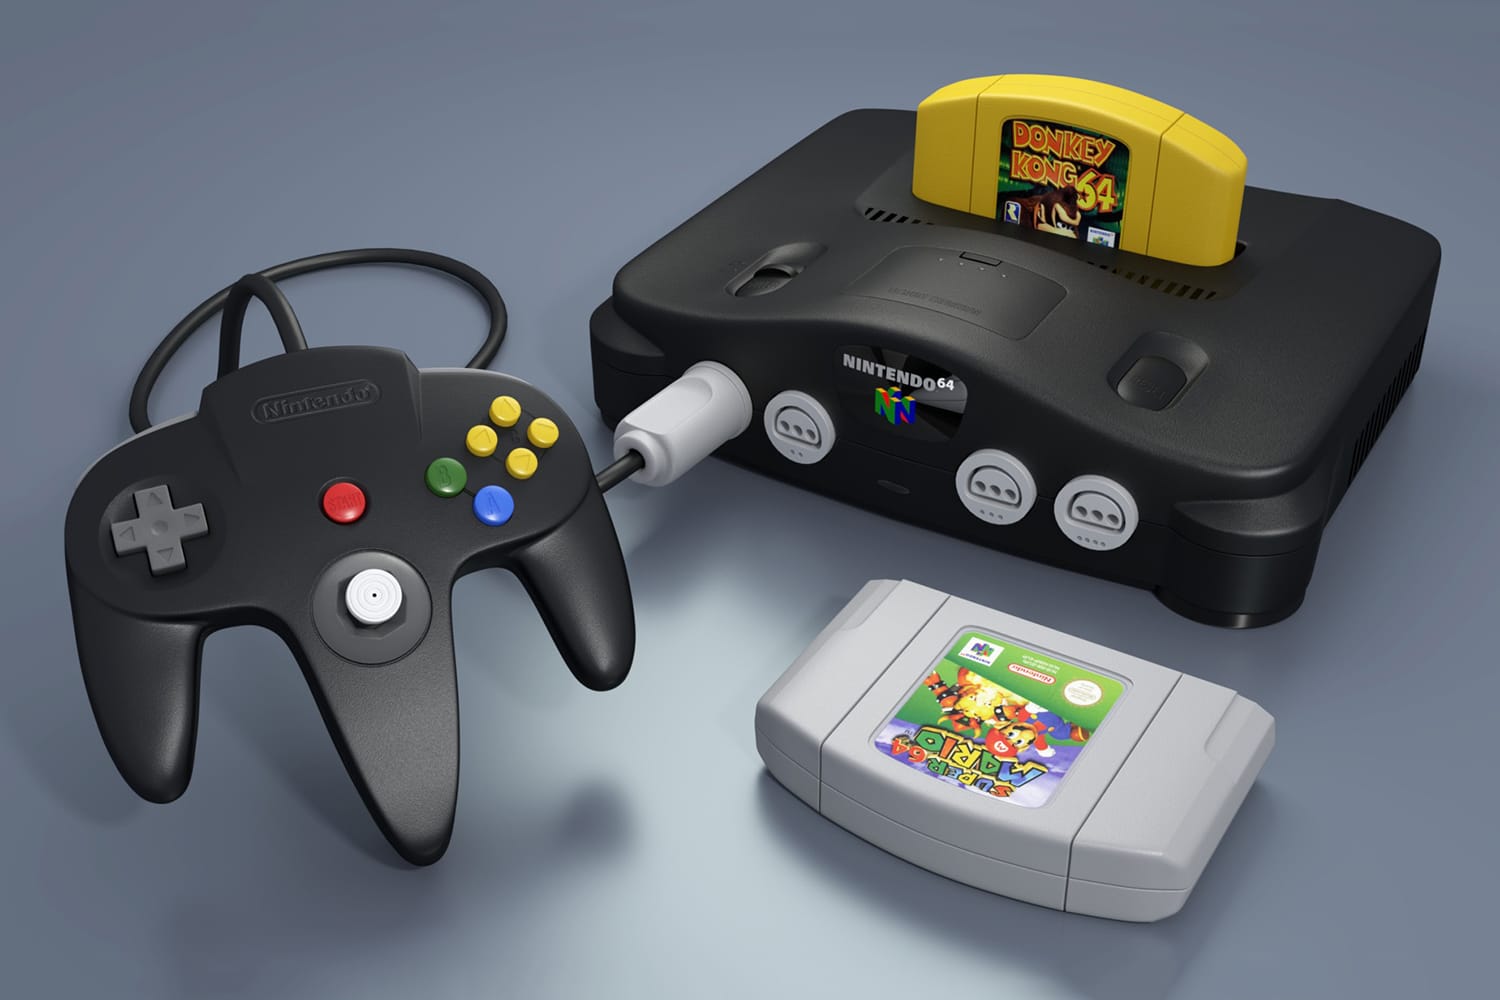 n64 classic edition release date